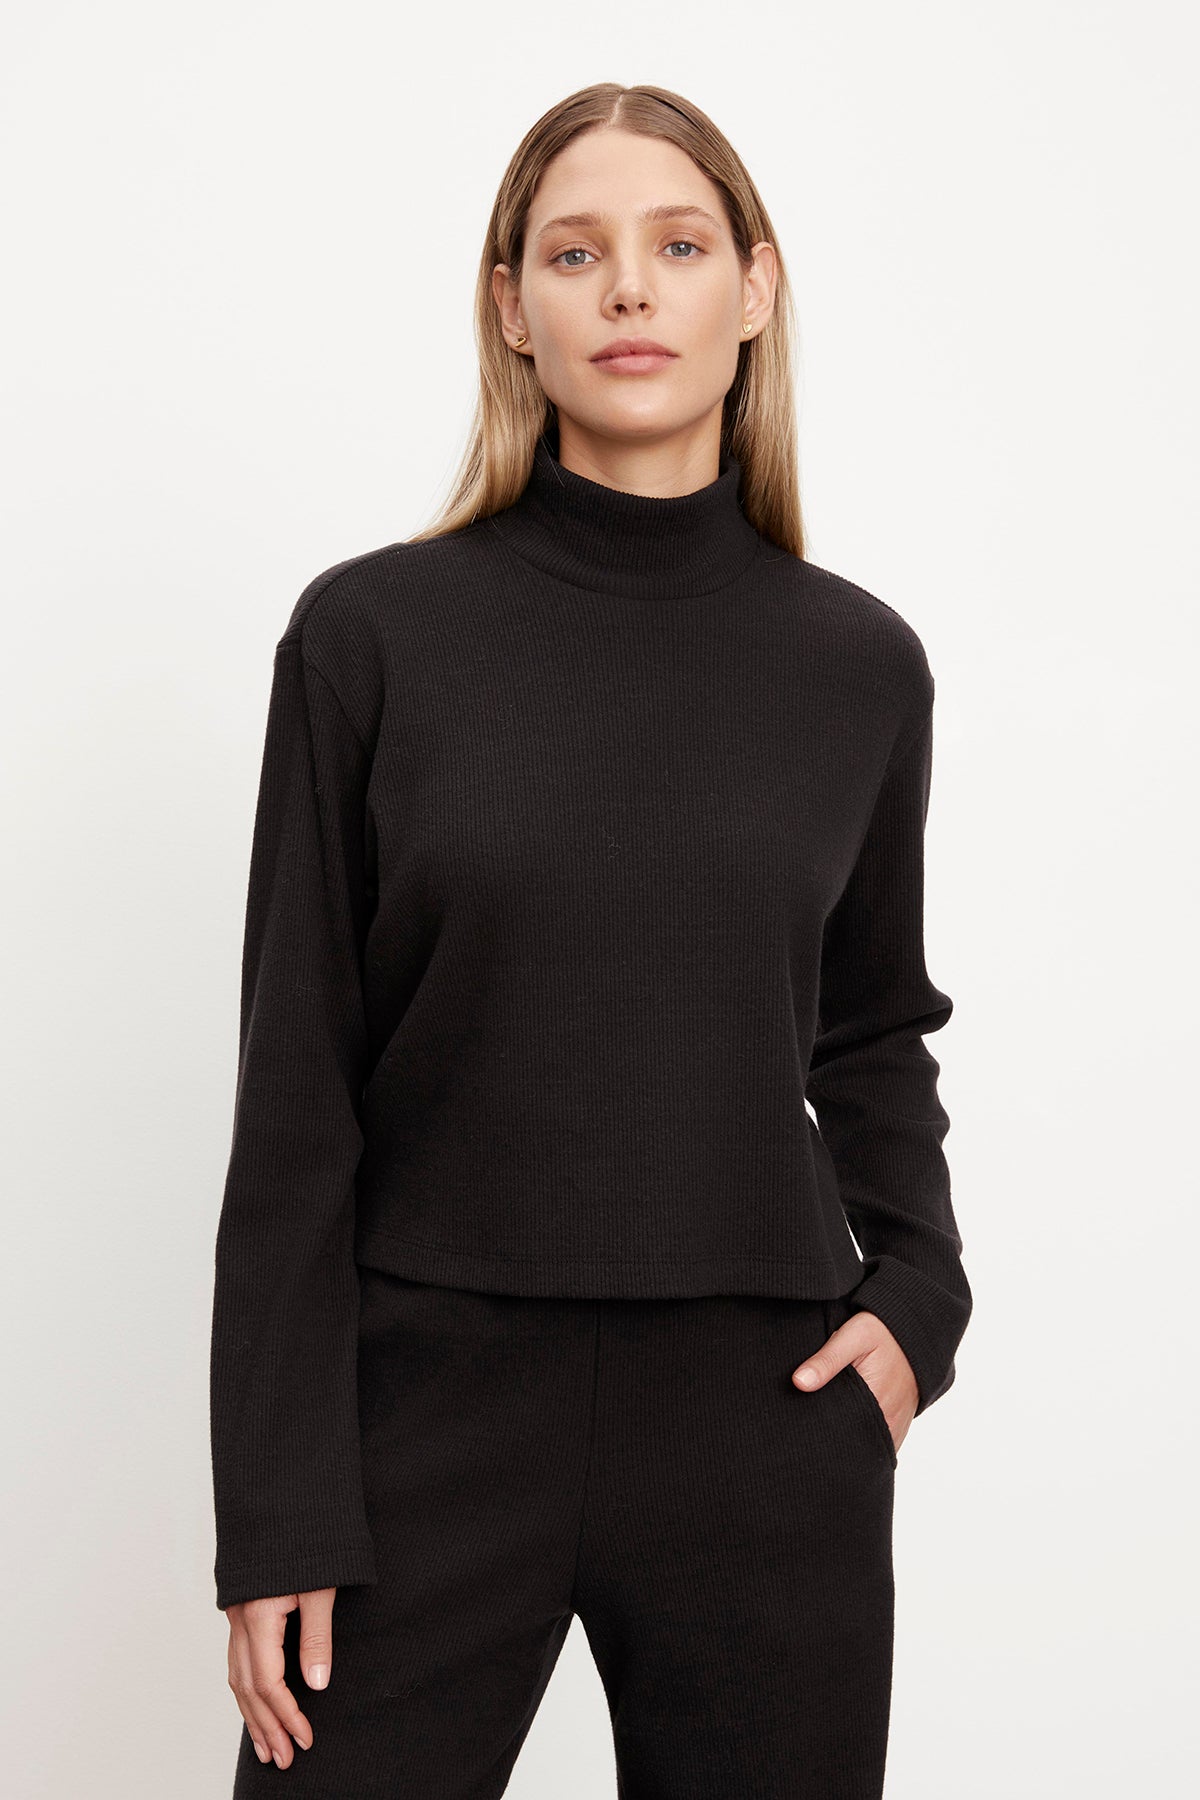 A woman wearing the Velvet by Graham & Spencer ALEC BRUSHED RIB TURTLENECK TOP and pants.-35701823439041